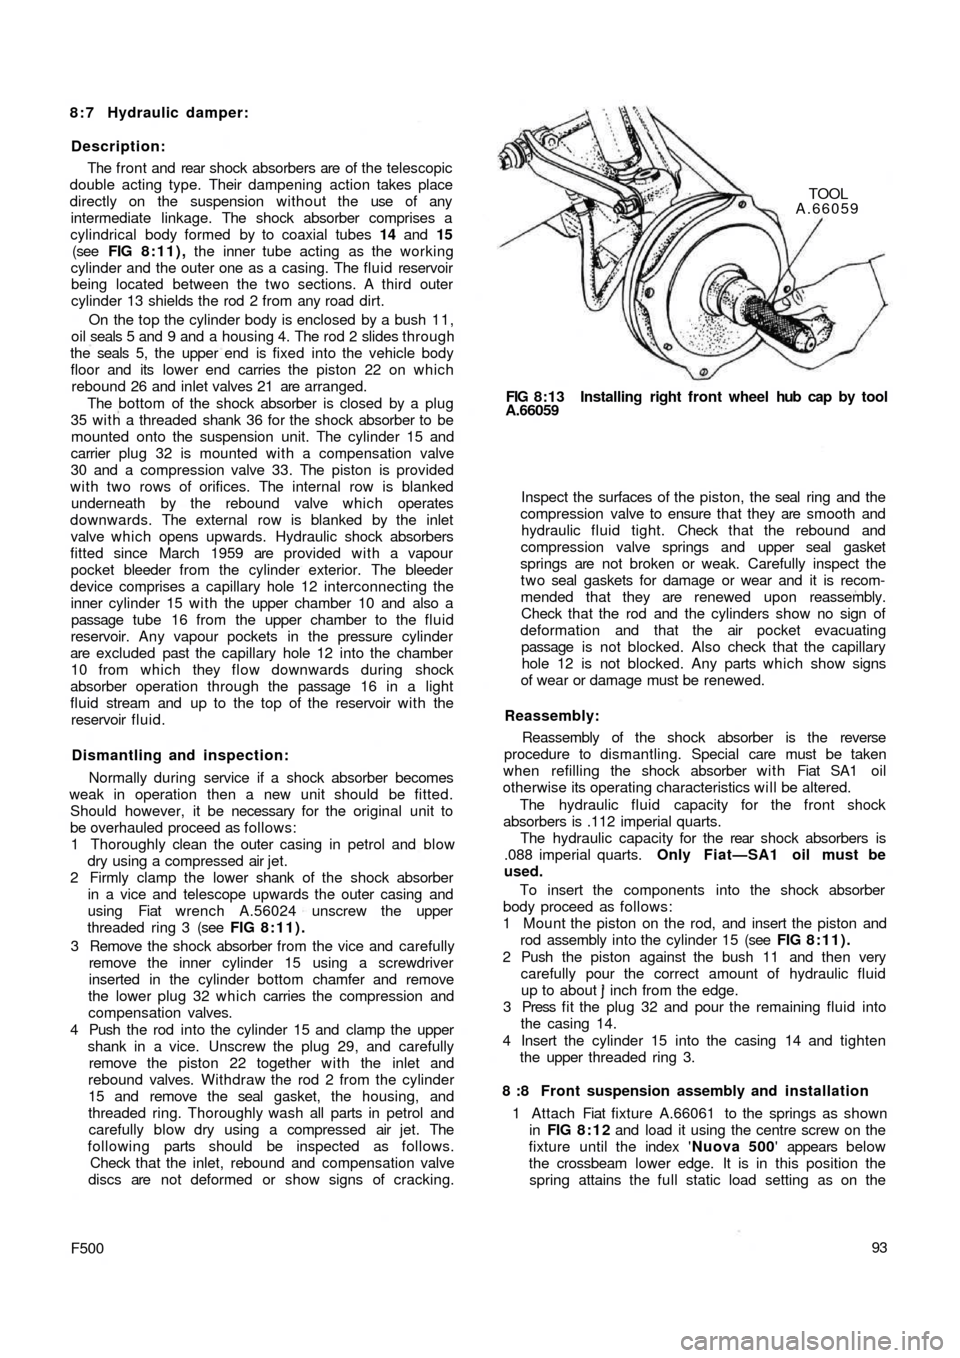 FIAT 500 1970 1.G Workshop Manual 8 : 7 Hydraulic damper:
Description:
The front and rear  shock absorbers are of the telescopic
double acting type. Their dampening action takes place
directly on the suspension without the use of any
